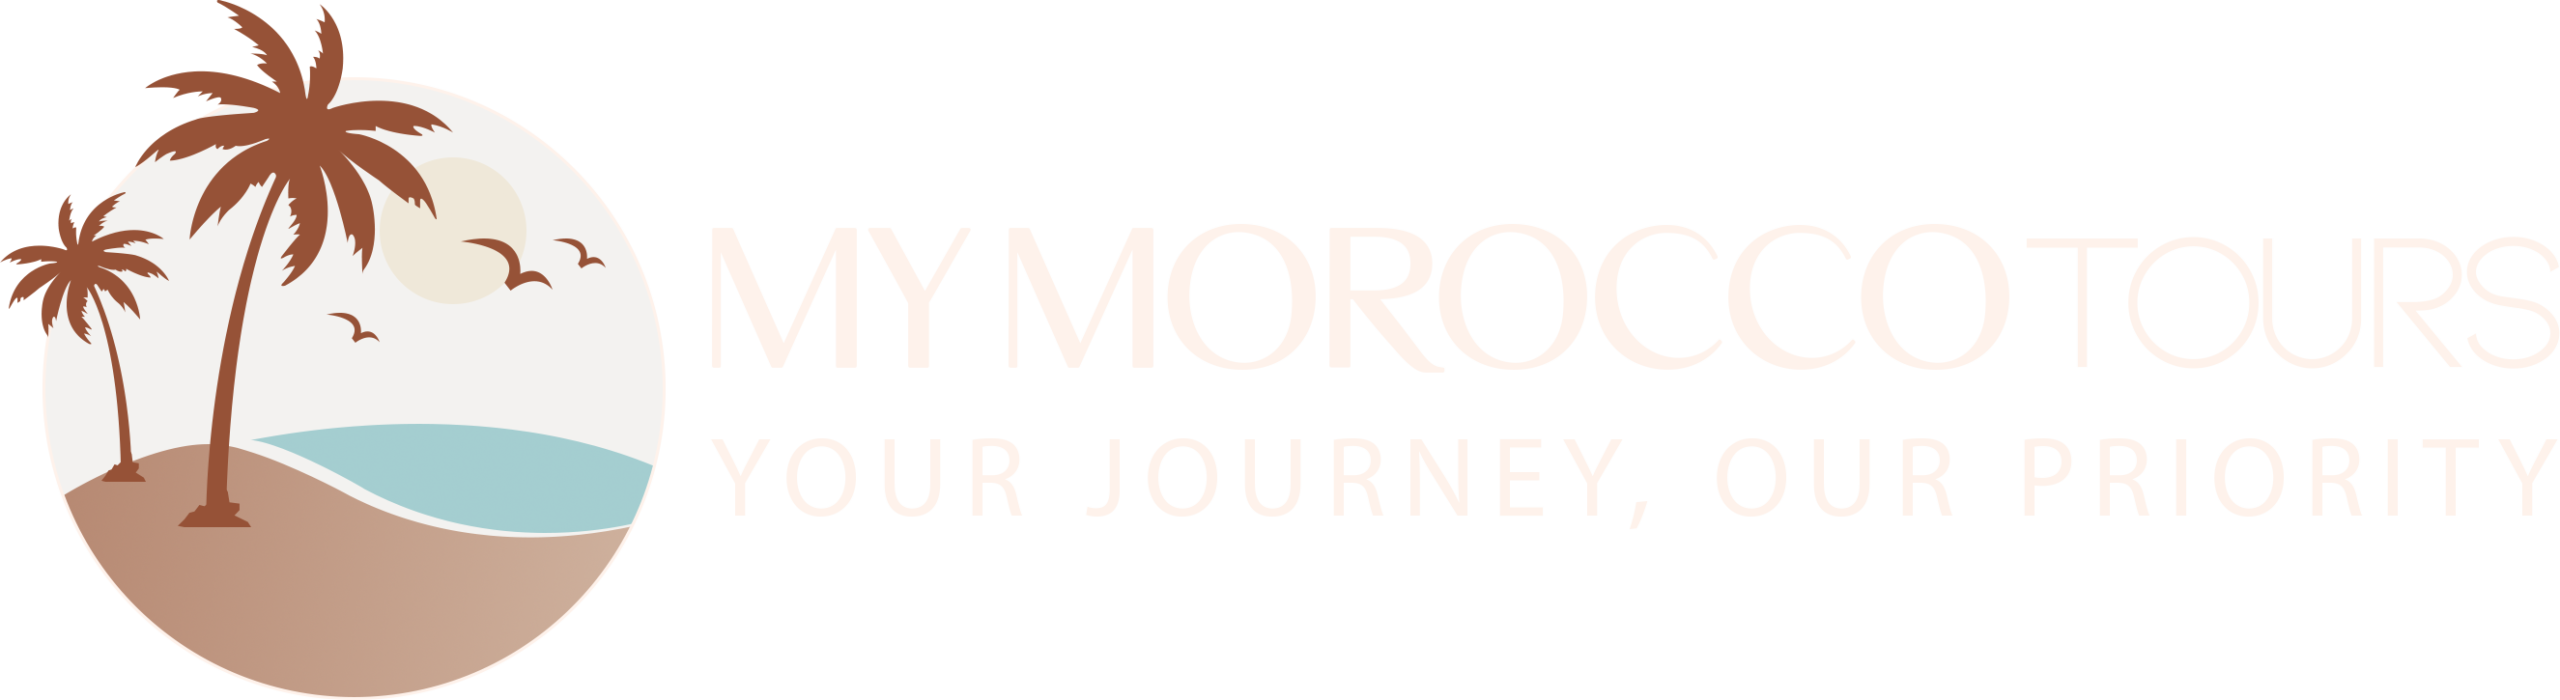 My Morocco Tours